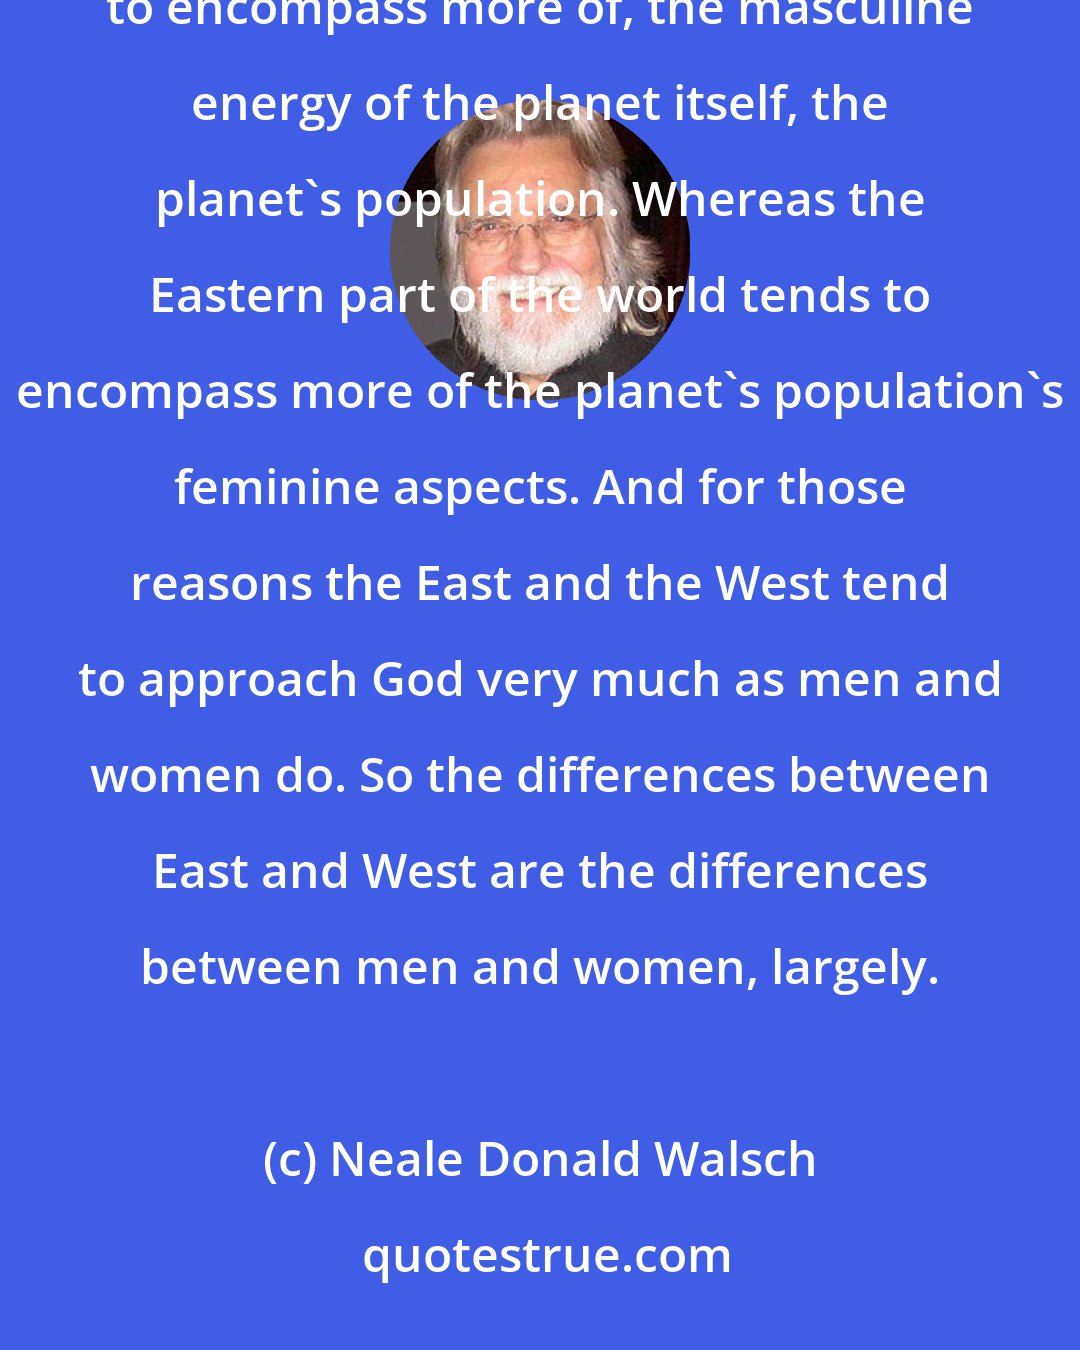 Neale Donald Walsch: I think that it is true that for me as I observe it, that the Western World tends to be more of , tends to encompass more of, the masculine energy of the planet itself, the planet's population. Whereas the Eastern part of the world tends to encompass more of the planet's population's feminine aspects. And for those reasons the East and the West tend to approach God very much as men and women do. So the differences between East and West are the differences between men and women, largely.